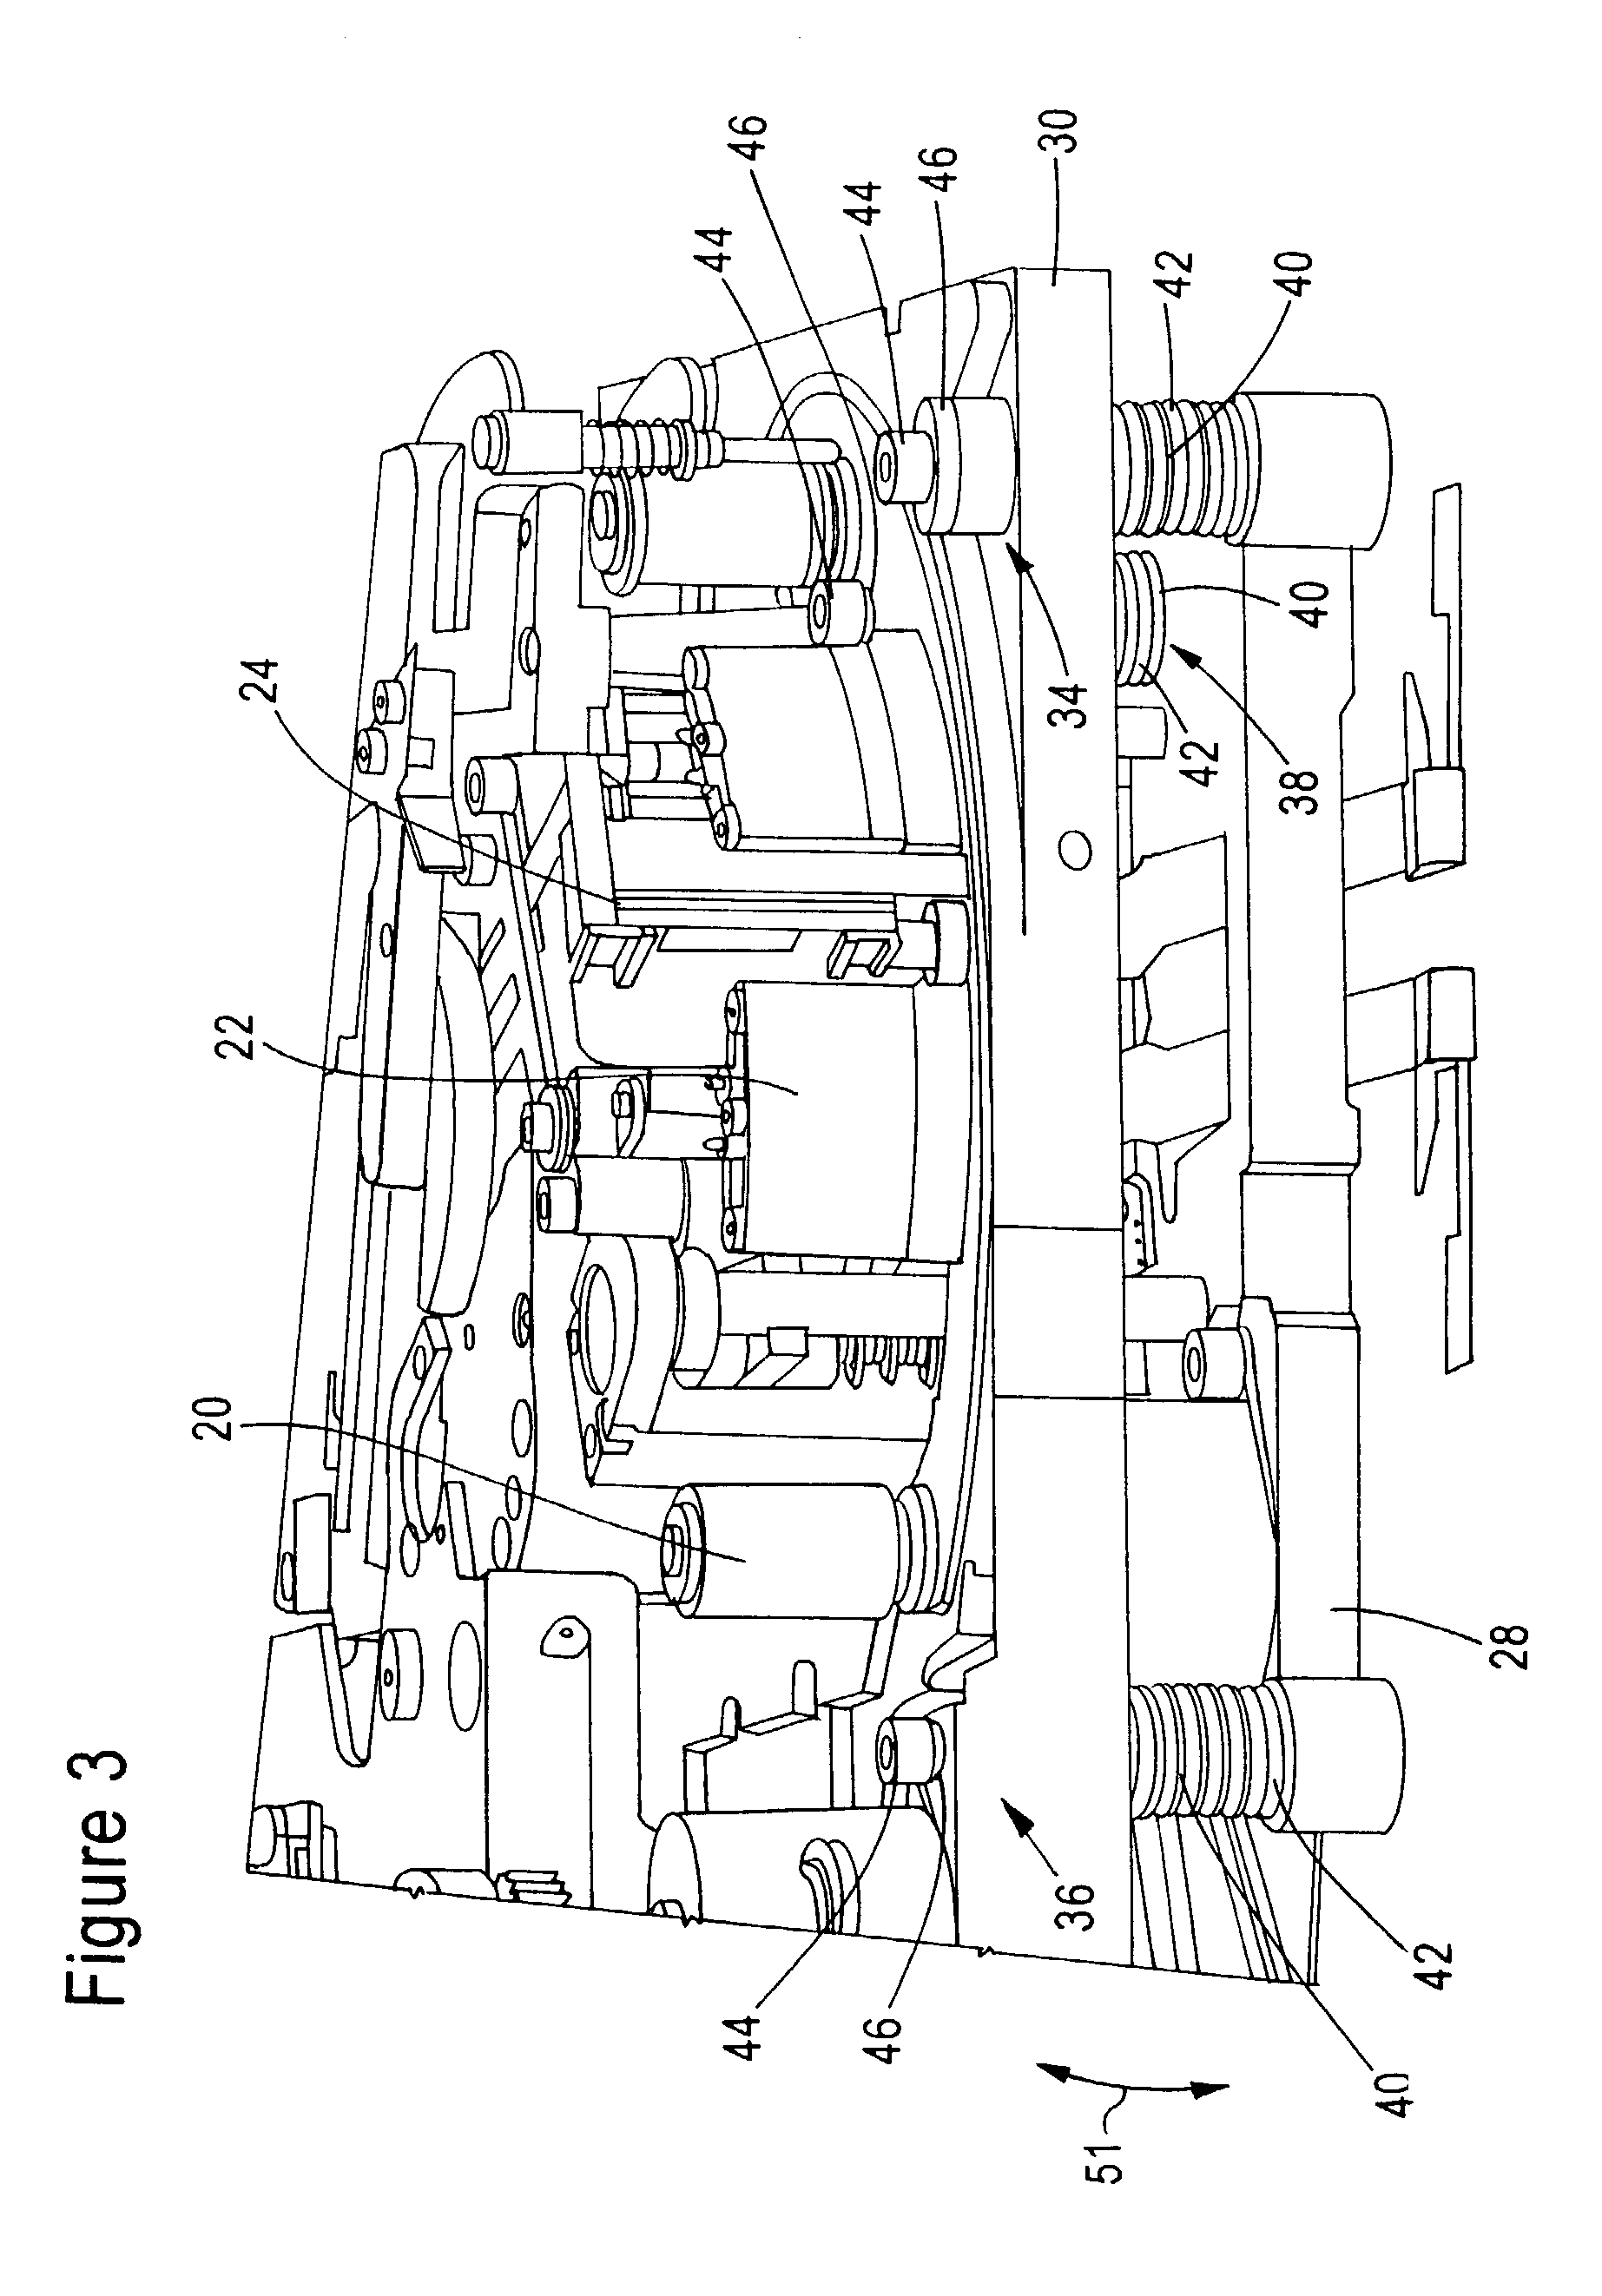 Tape drive apparatus with a head alignment system